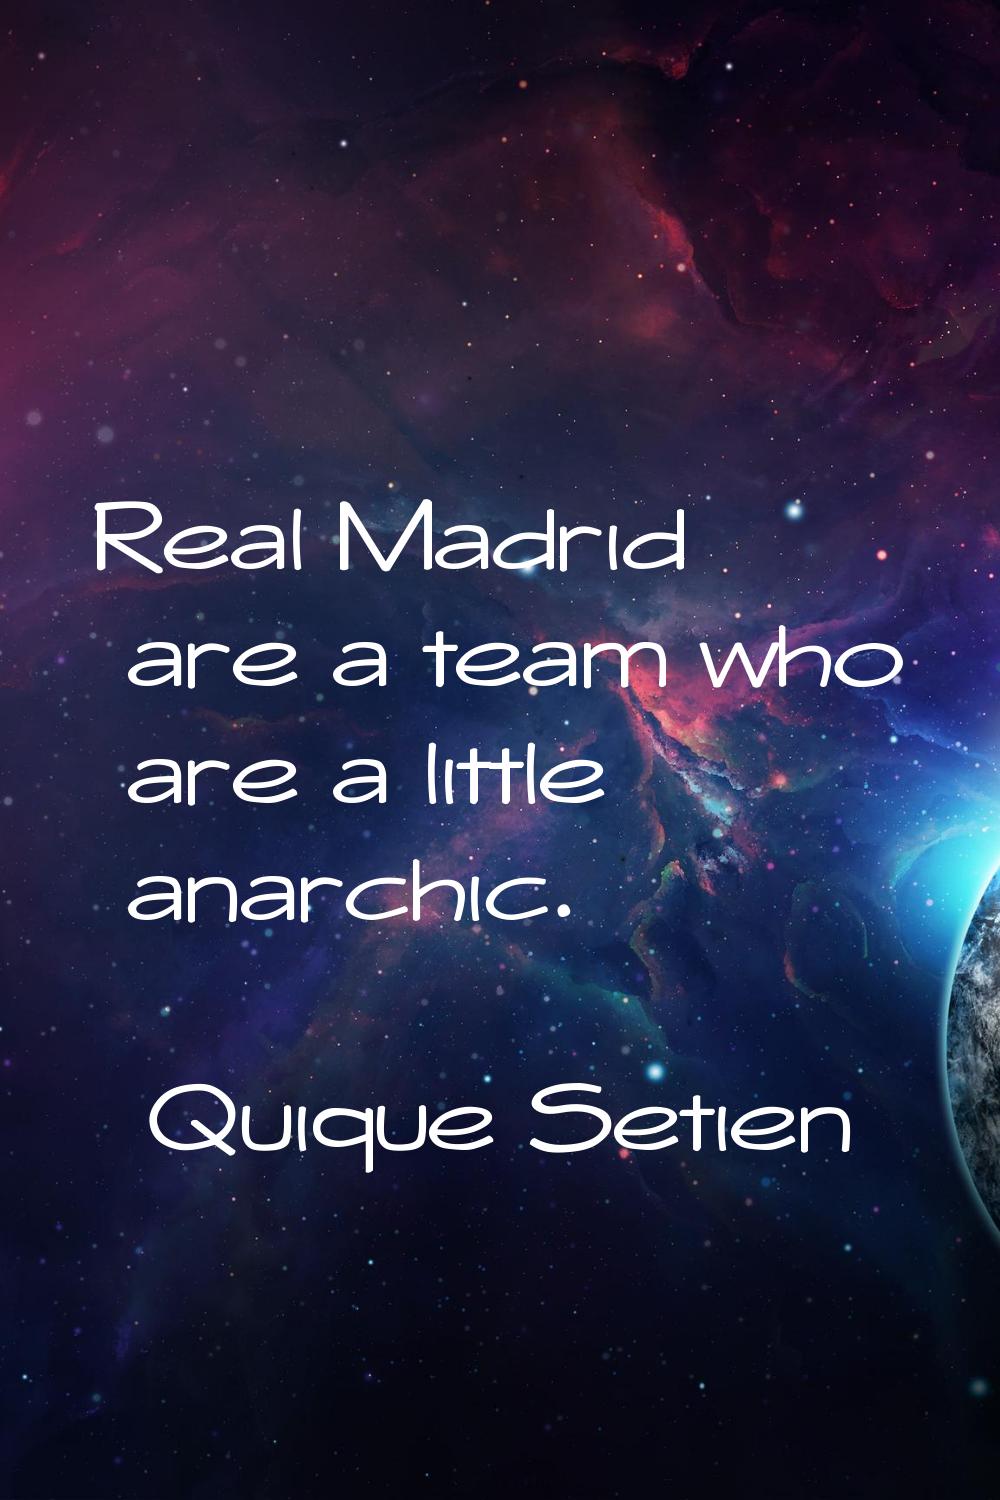 Real Madrid are a team who are a little anarchic.